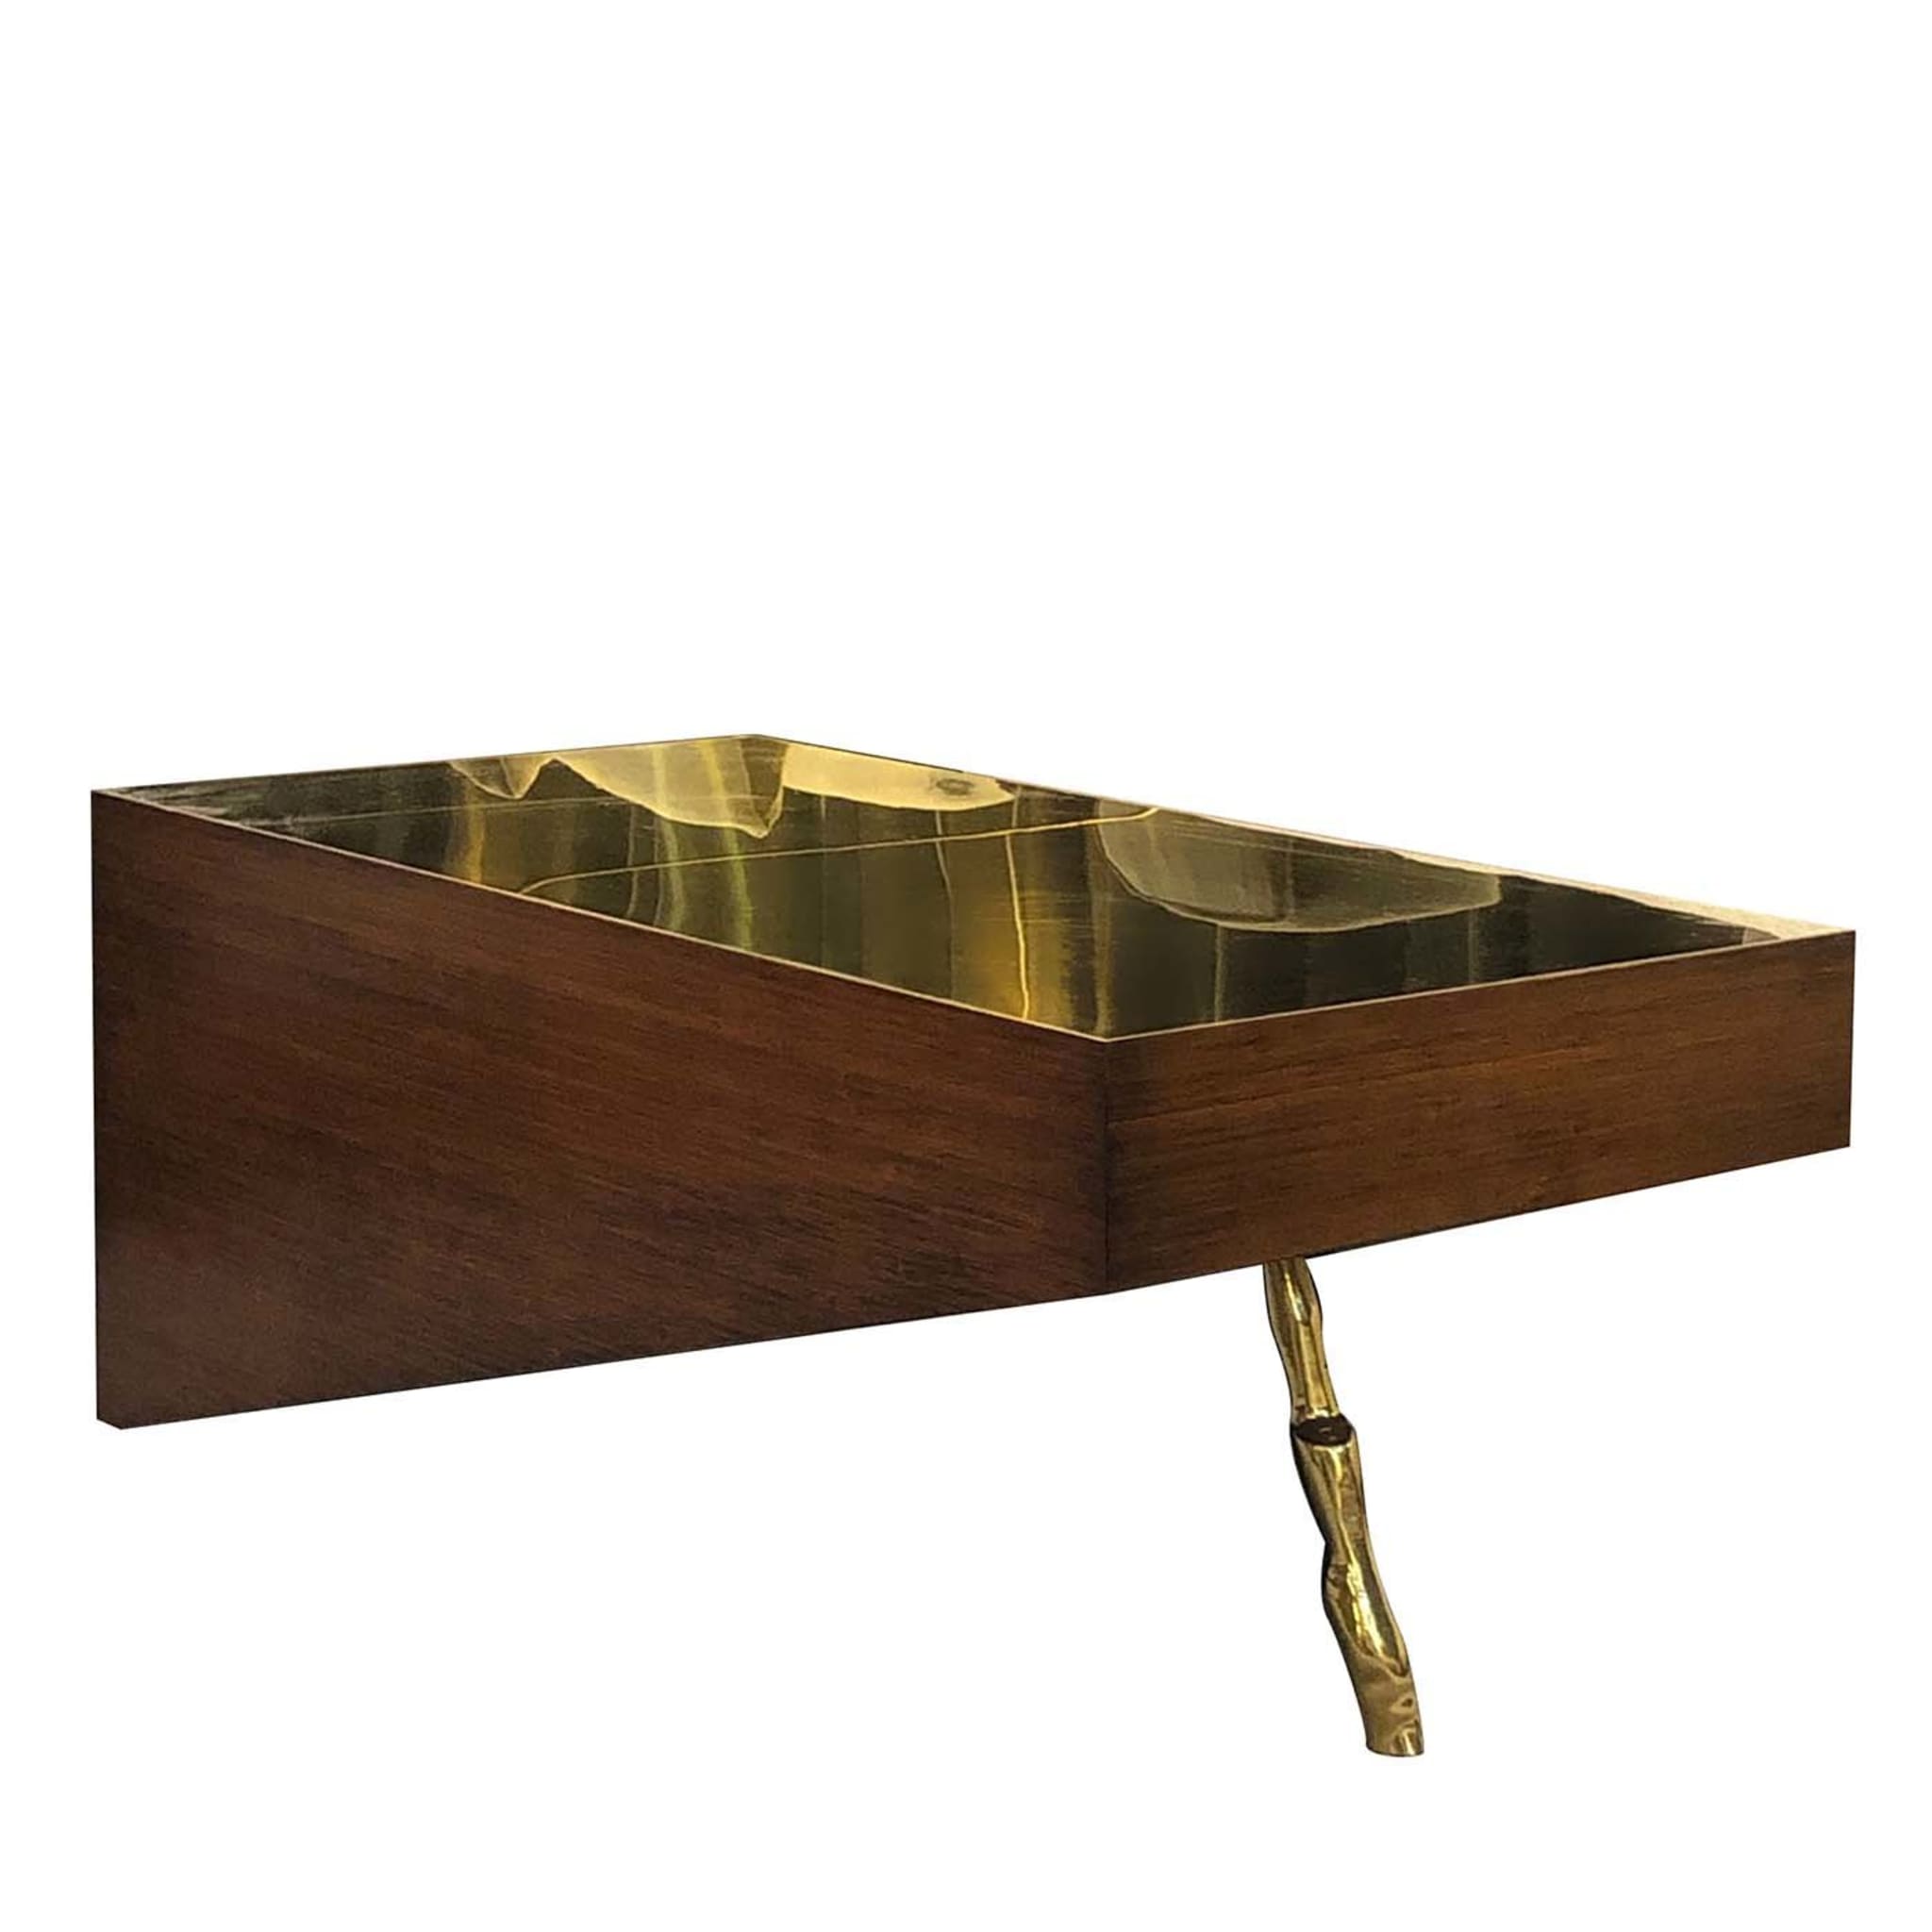 D/Zen Natural Rectangular Coffee Table Gold and Brown by CTRLZAK - Main view